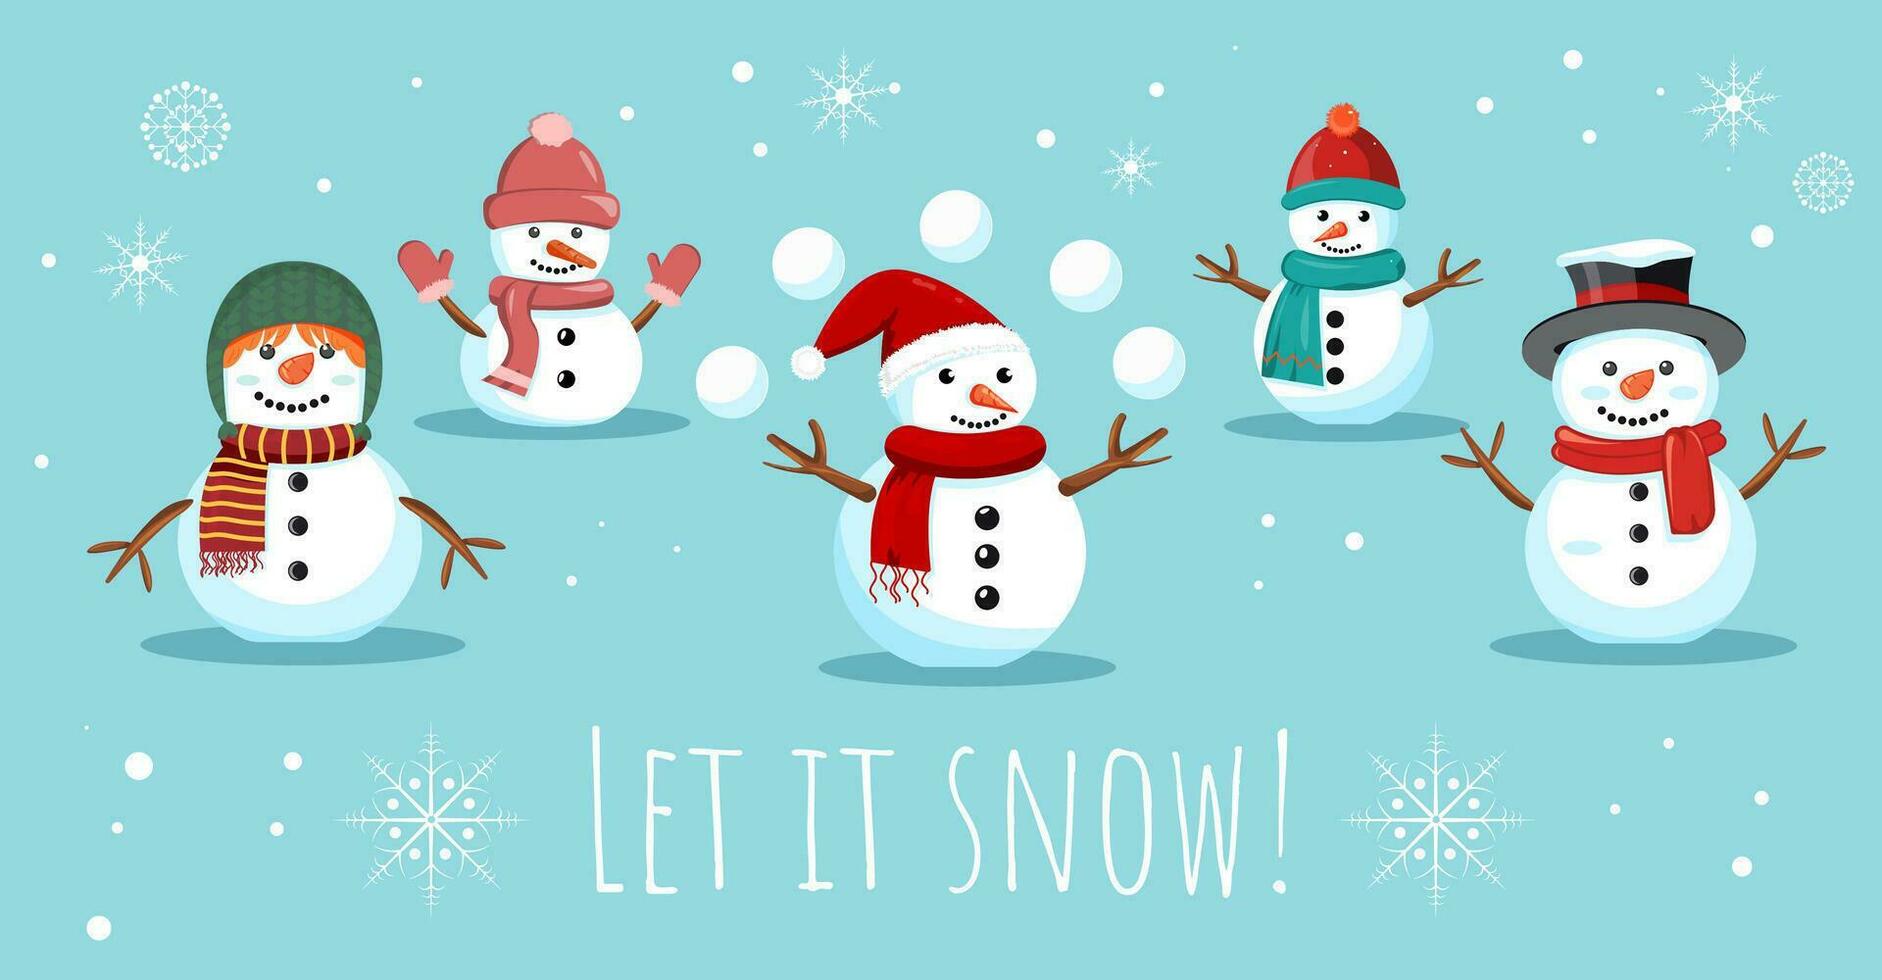 Winter horizontal banner design with snowman and snowflakes vector